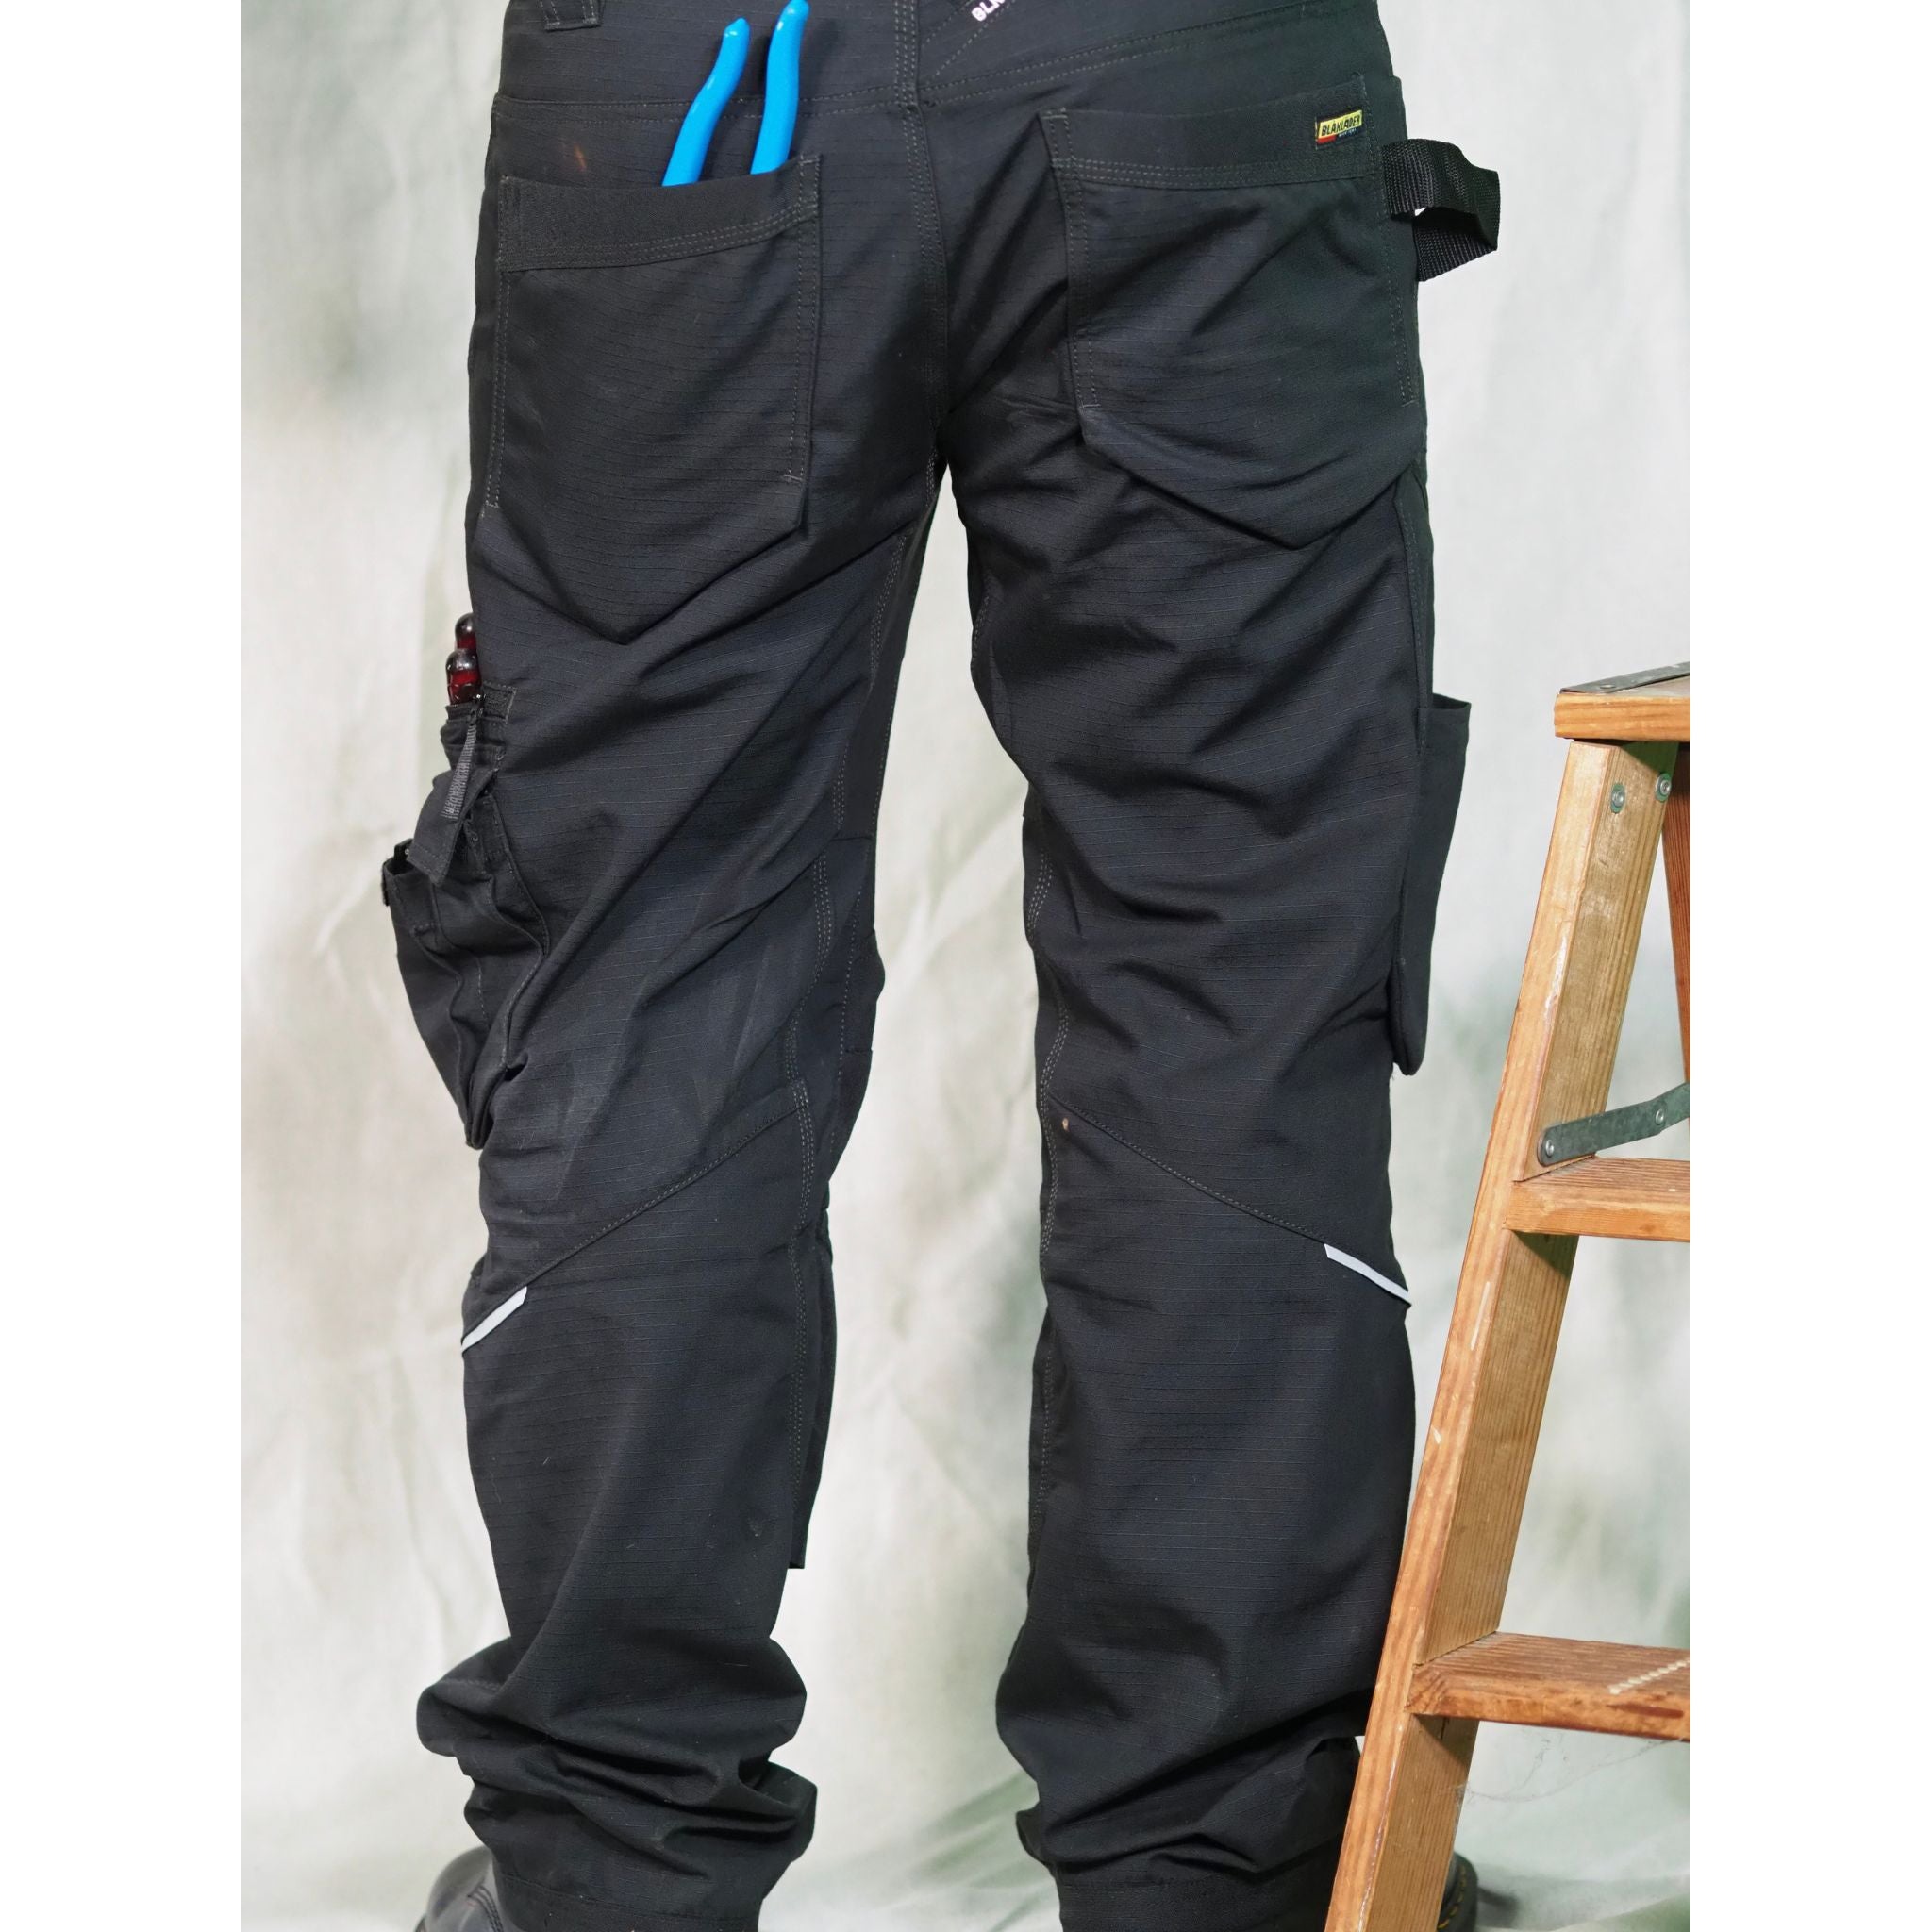 Men's technical workwear black pants with deep pockets